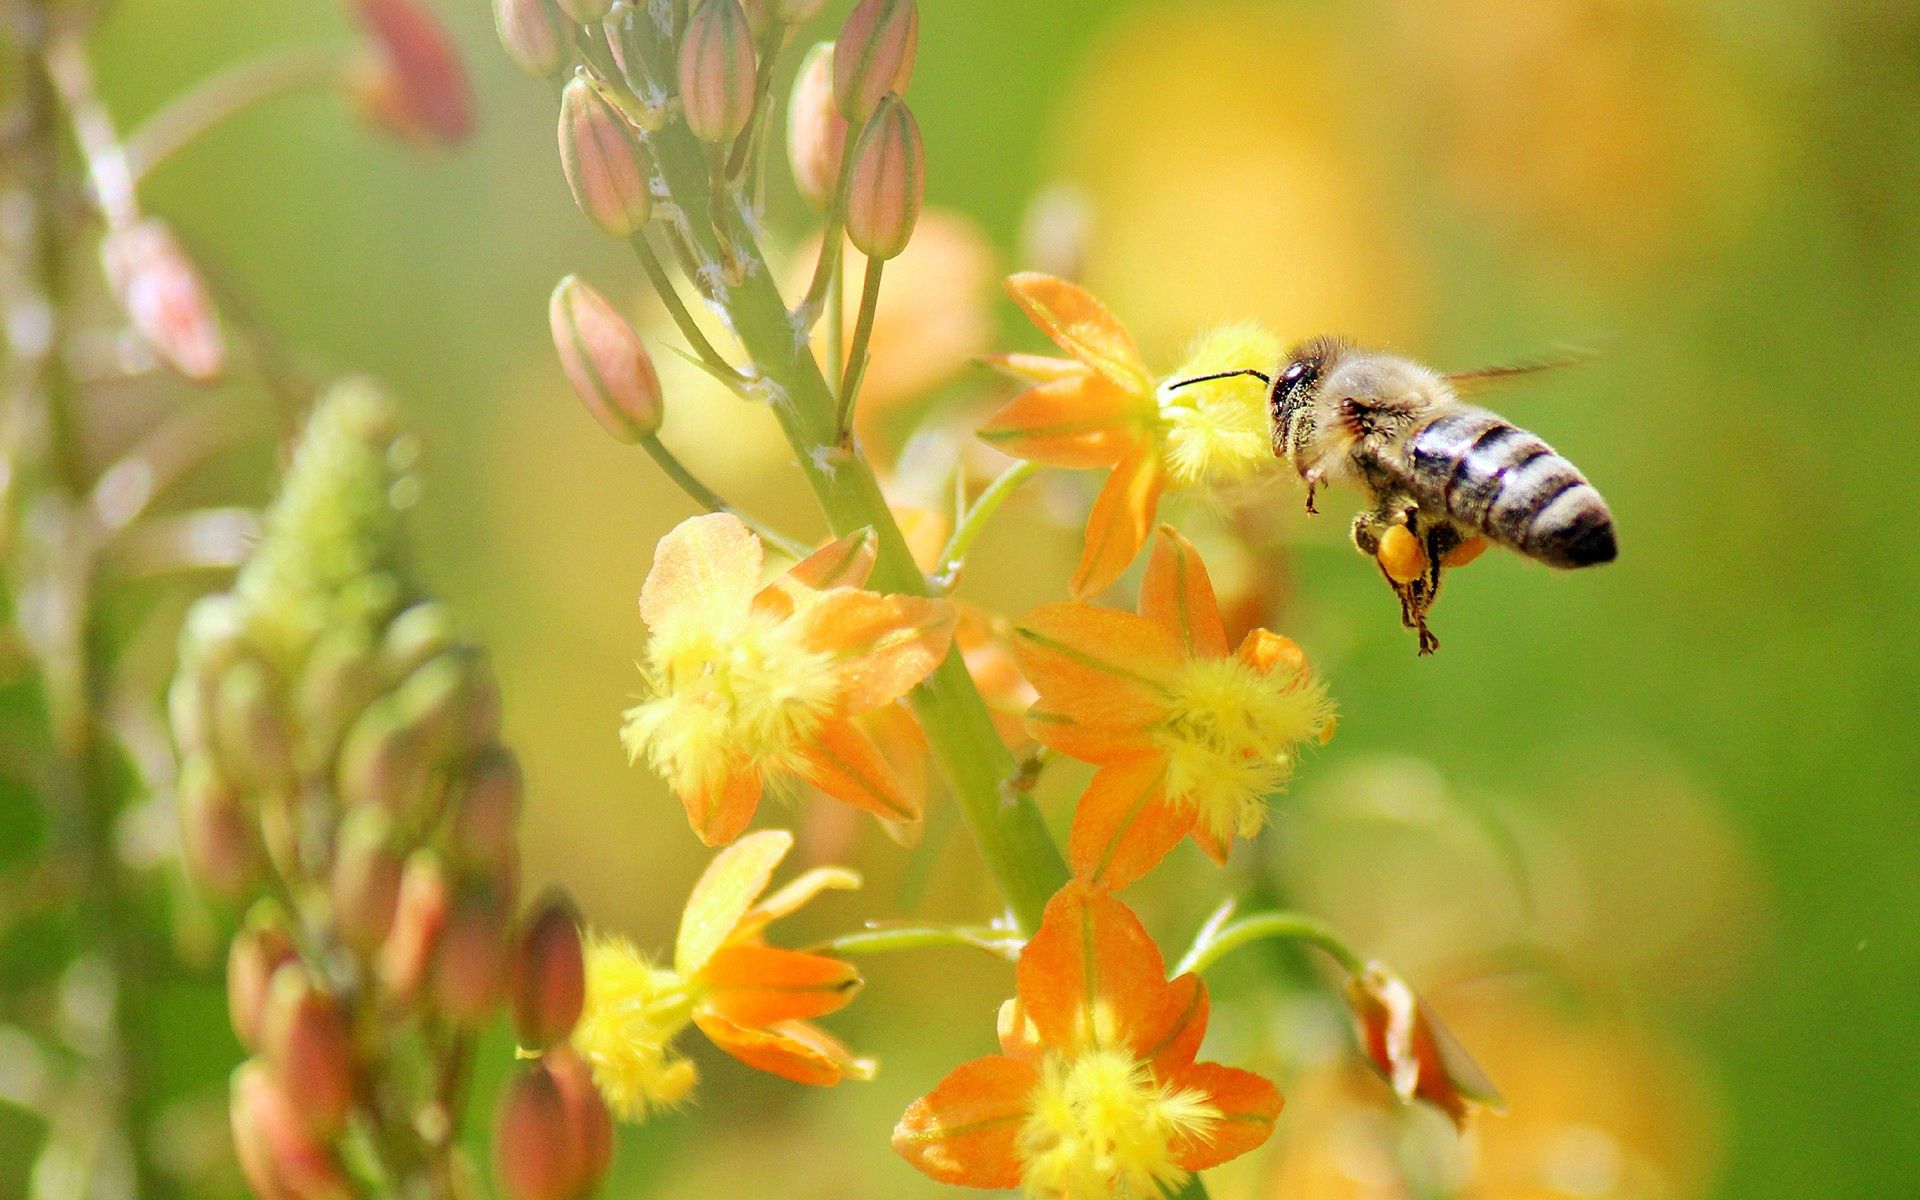 110374 Screensavers and Wallpapers Bee for phone. Download grass, plant, macro, flight, bee pictures for free